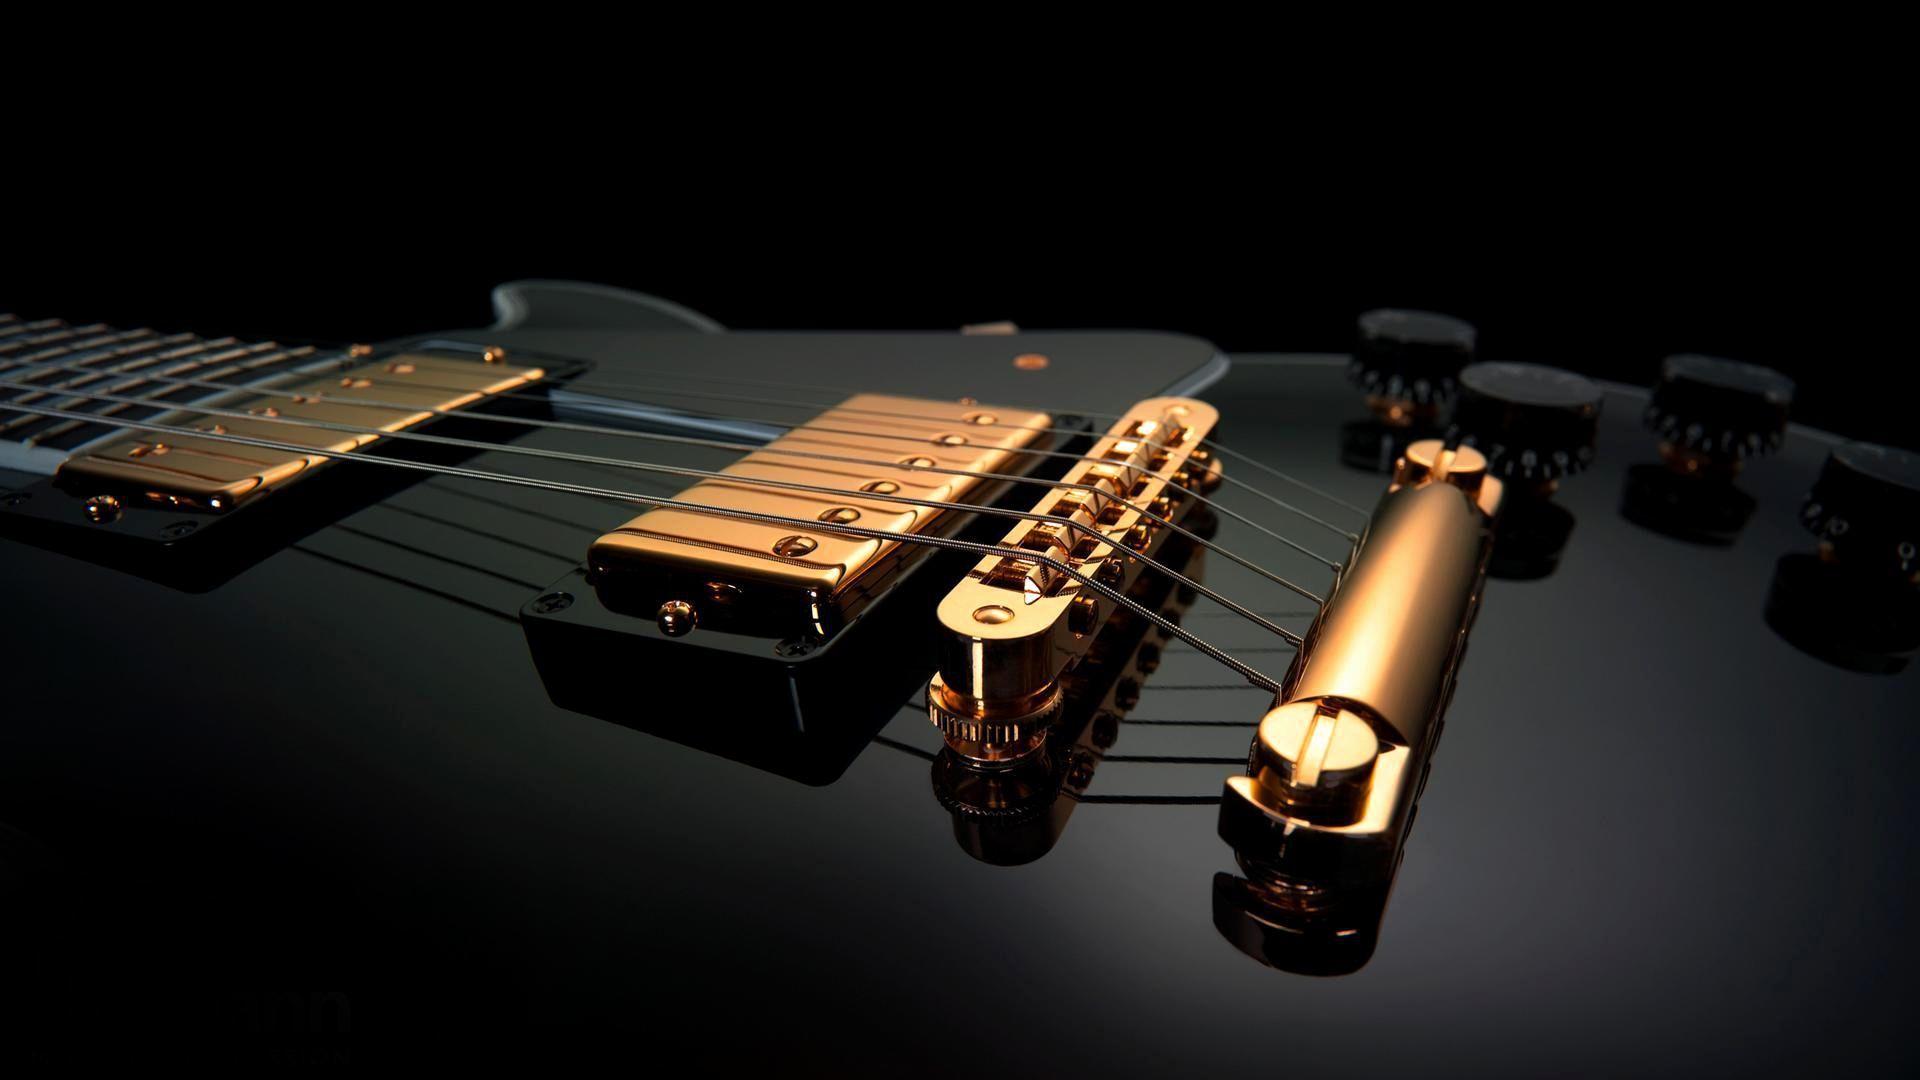 Ibanez Bass Gsr200 Free HD Picture Wallpaper Download Luxury Bass